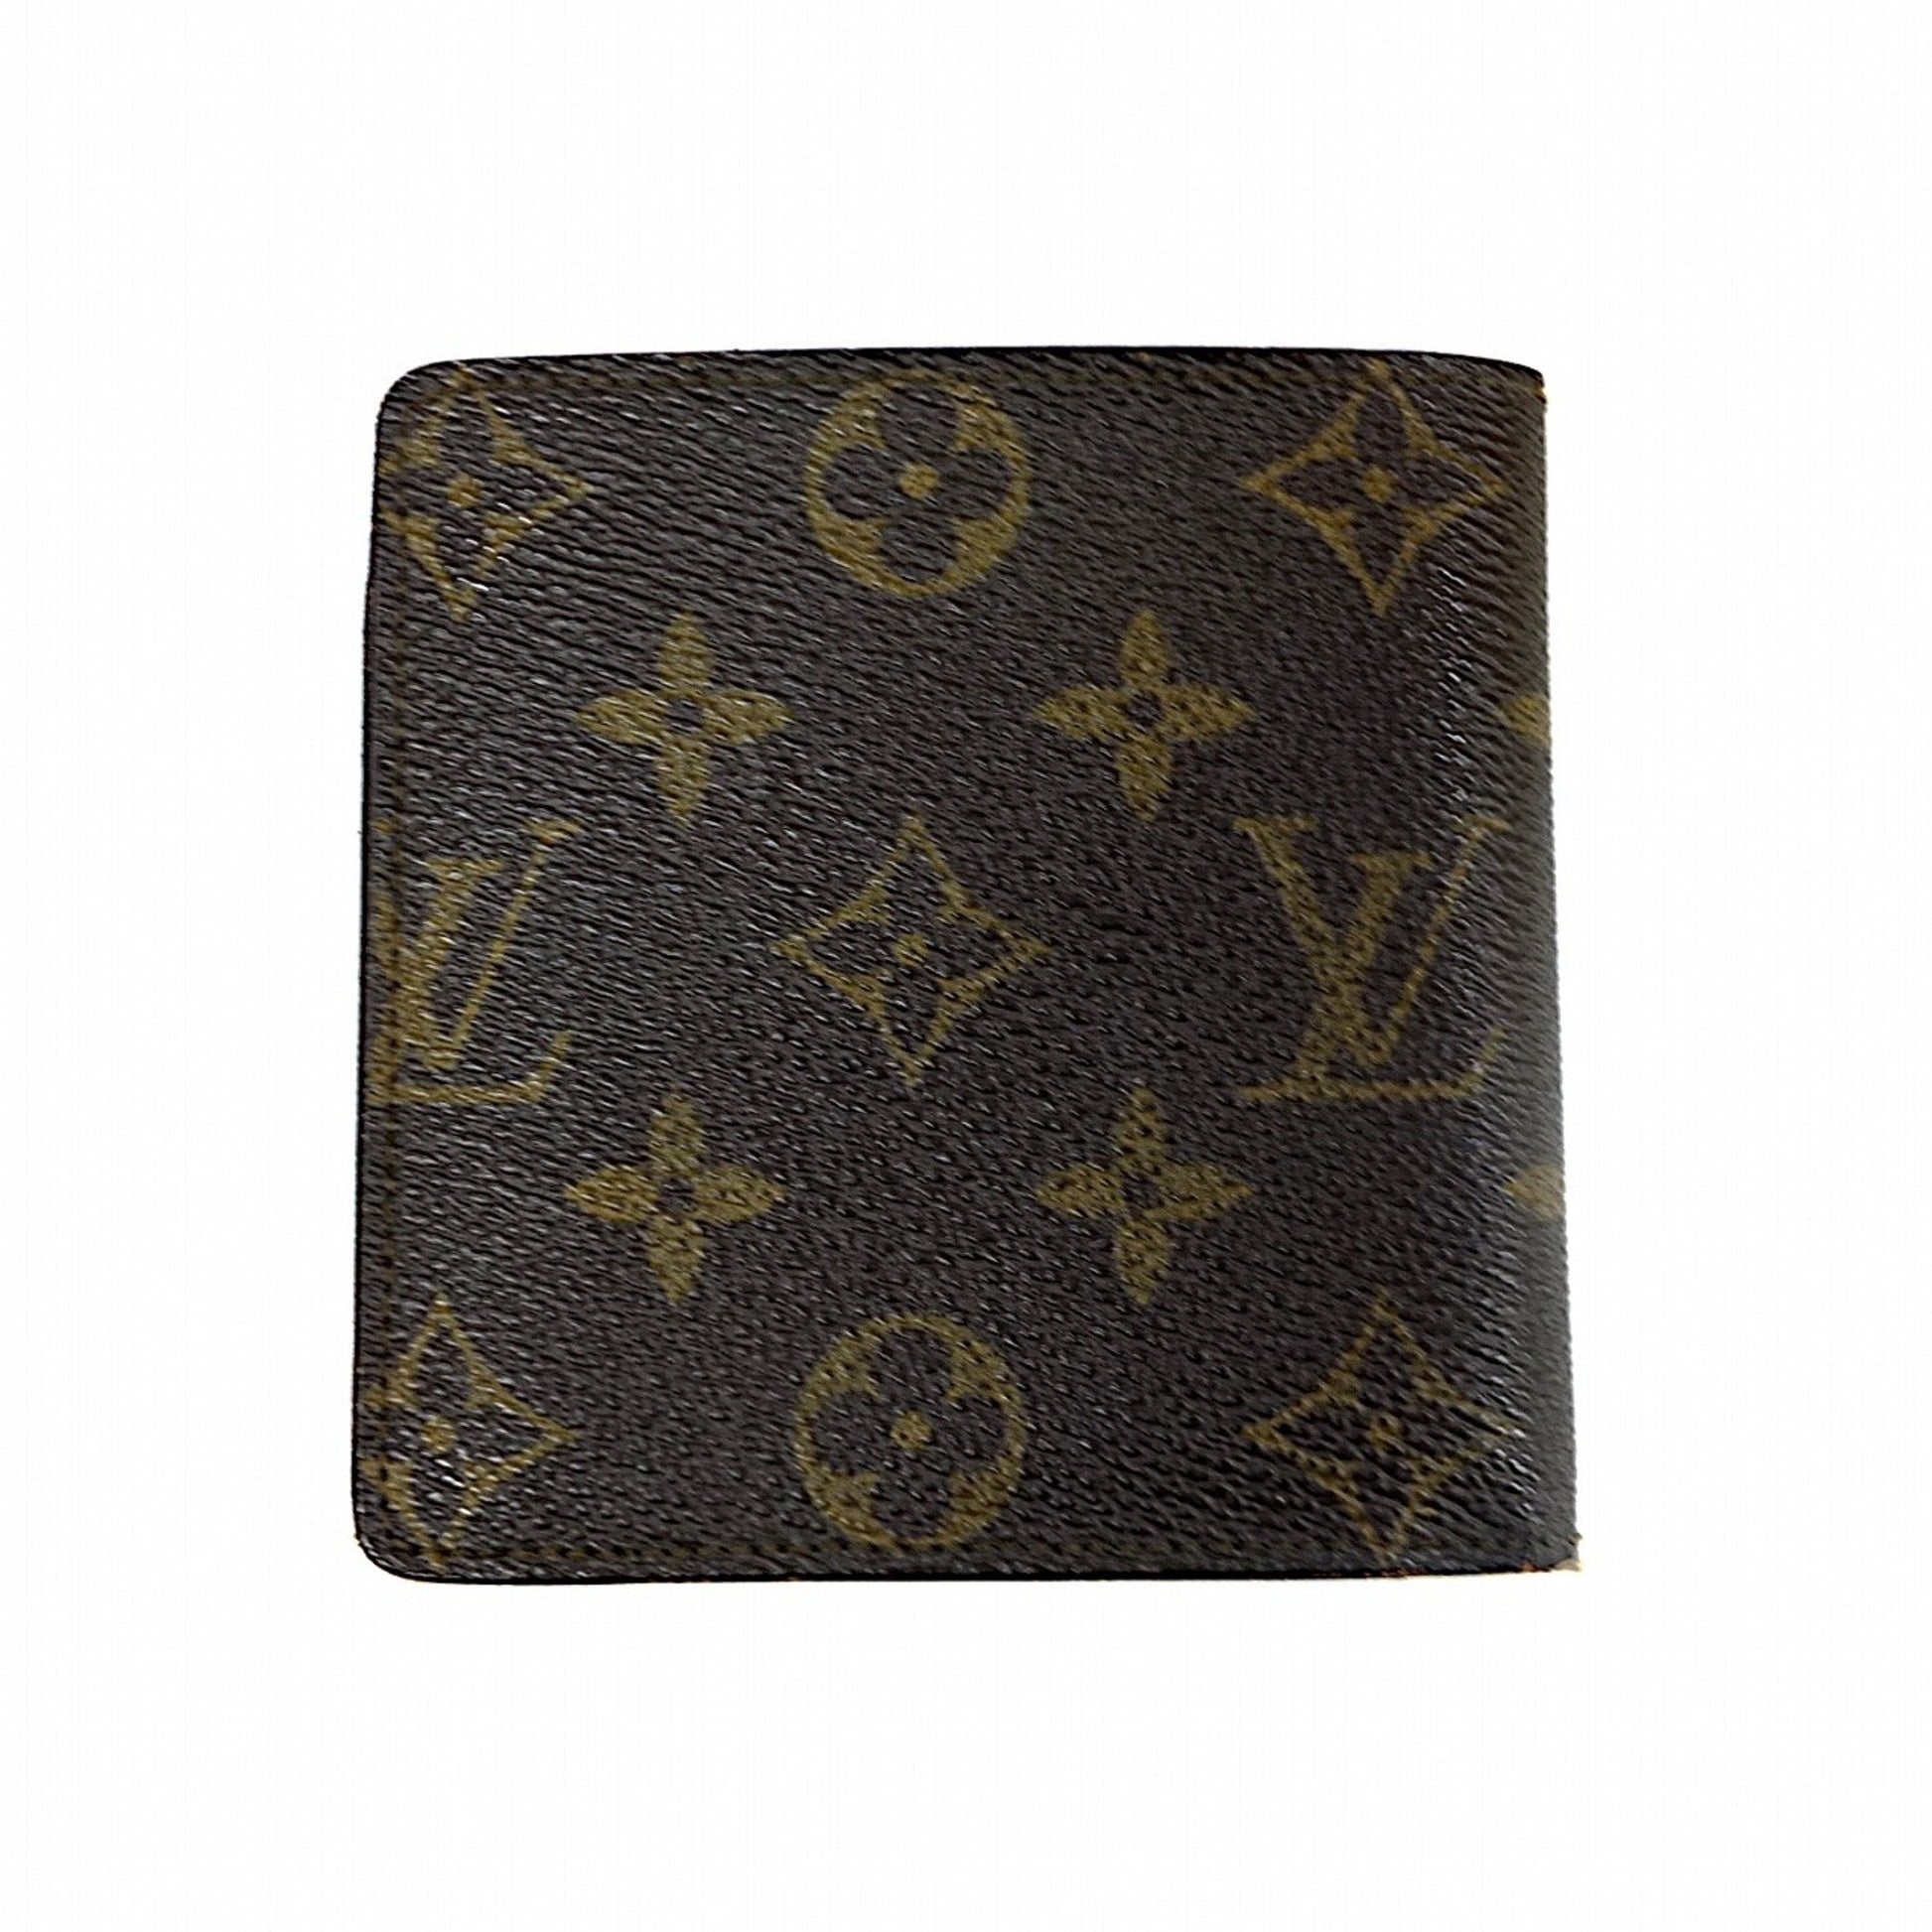 Buy Louis Vuitton monogram LOUIS VUITTON Portefeuille Marco M61675 Bifold  Wallet Brown / 083098 [Used] from Japan - Buy authentic Plus exclusive  items from Japan